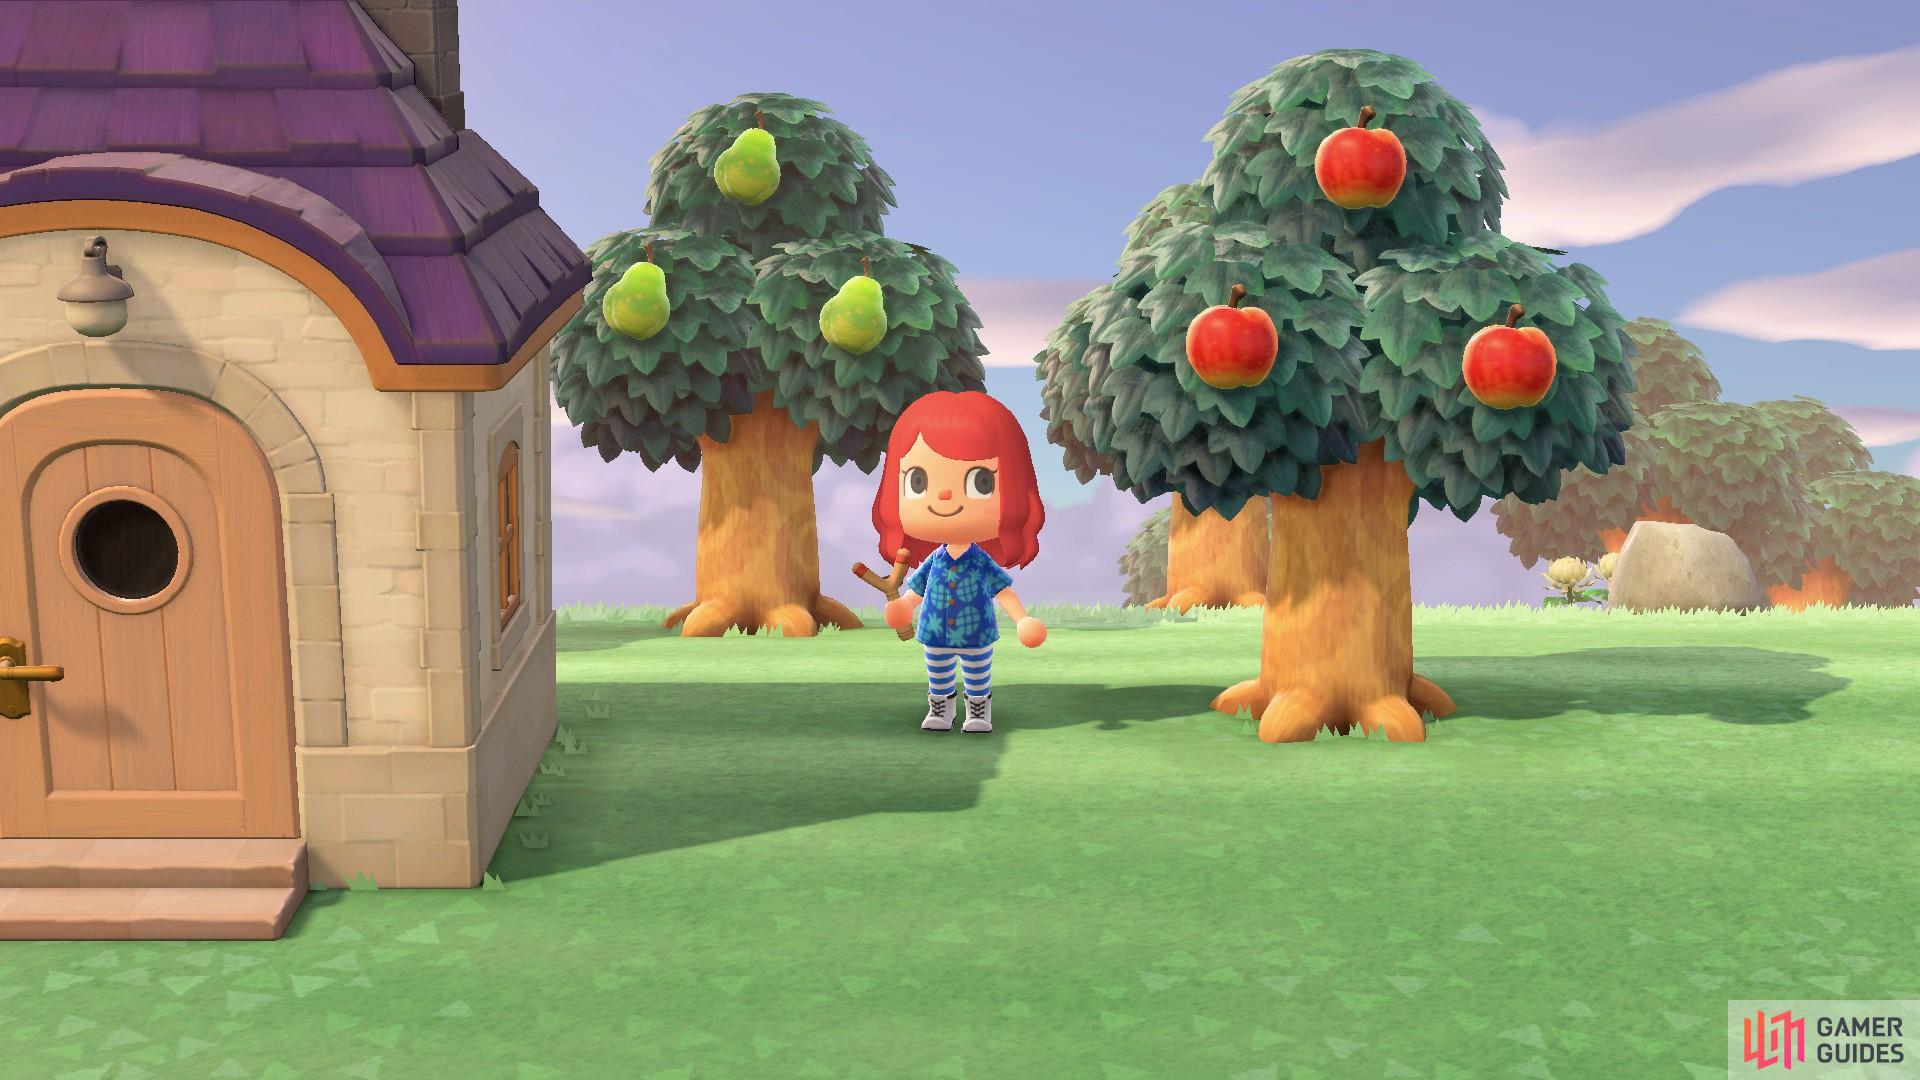 That pear tree is worth 1,500 bells on this island!